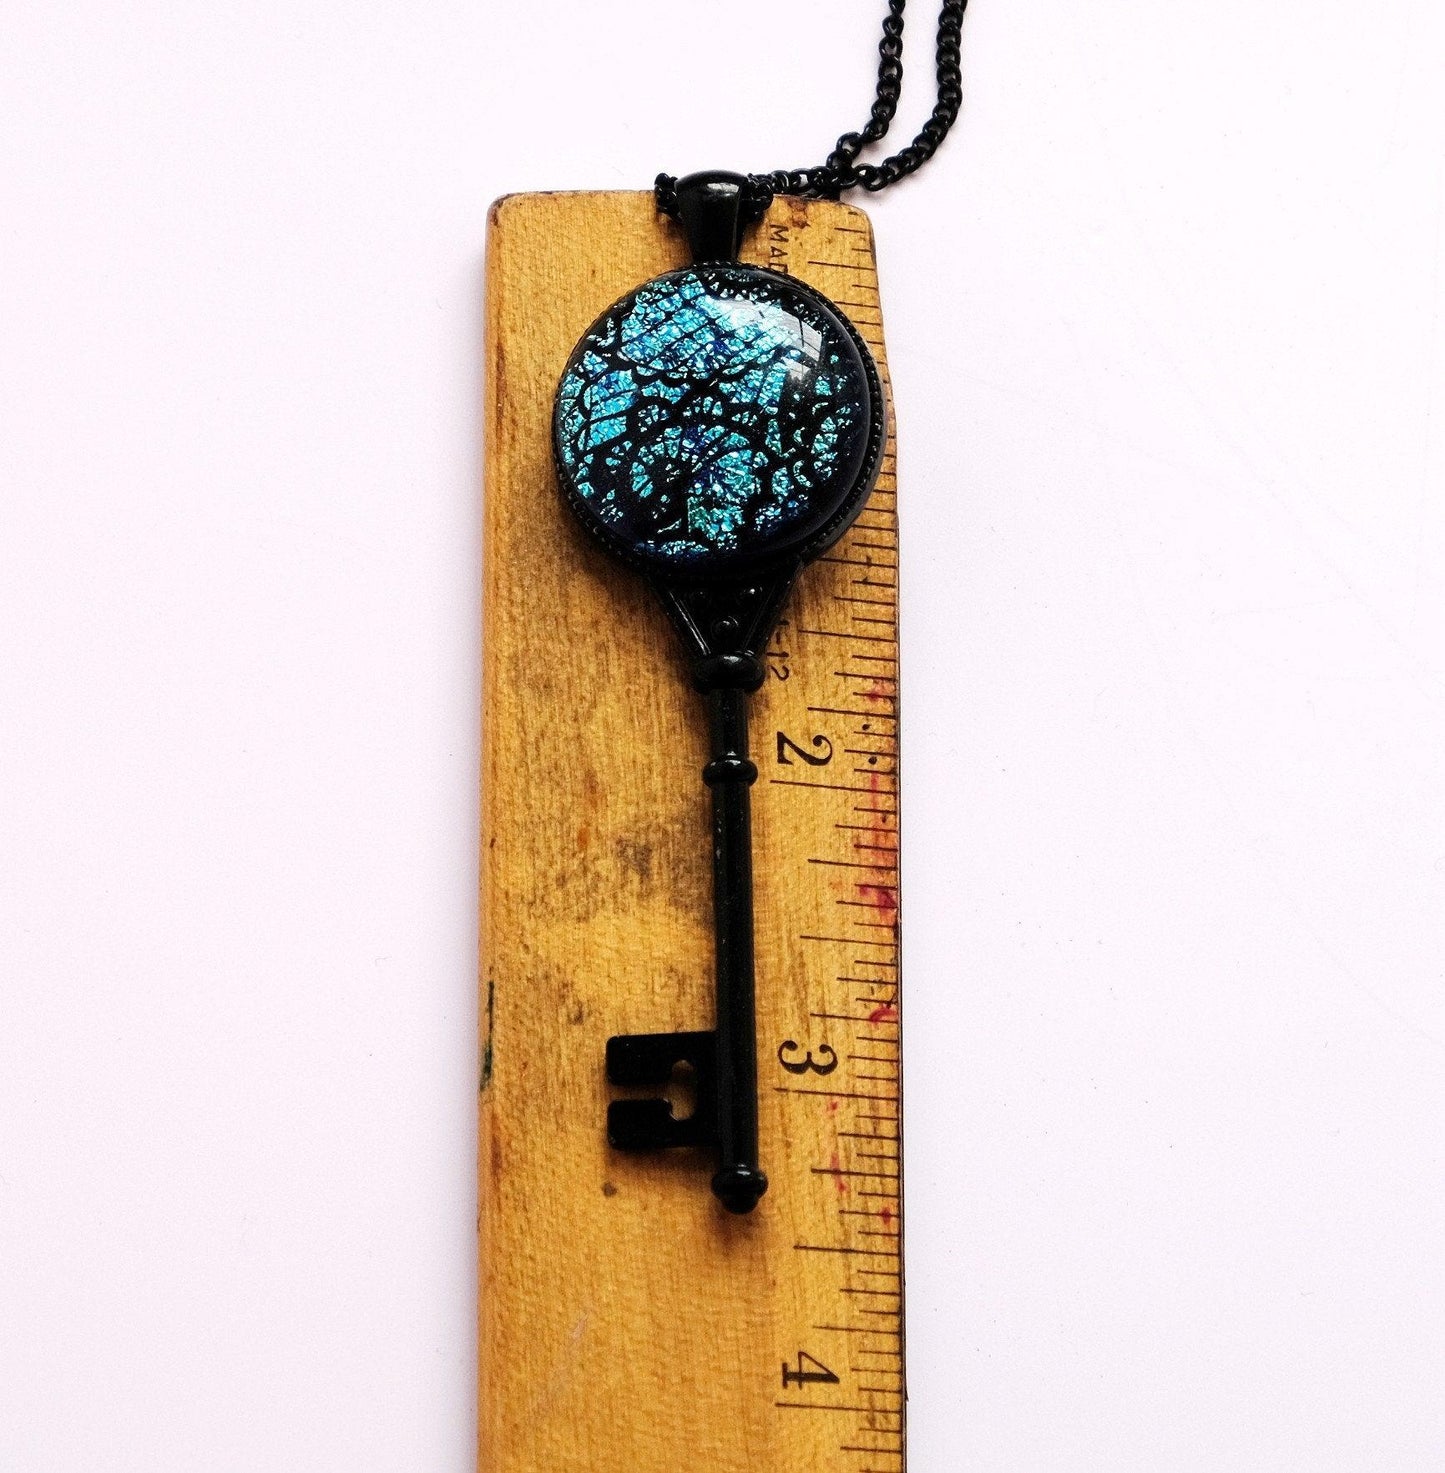 Products Black Metal Skeleton Key pendant necklace with Fused Glass Blue Lace cabochon on 24 inch black chain jewelry seeds glassworks seedsglassworks